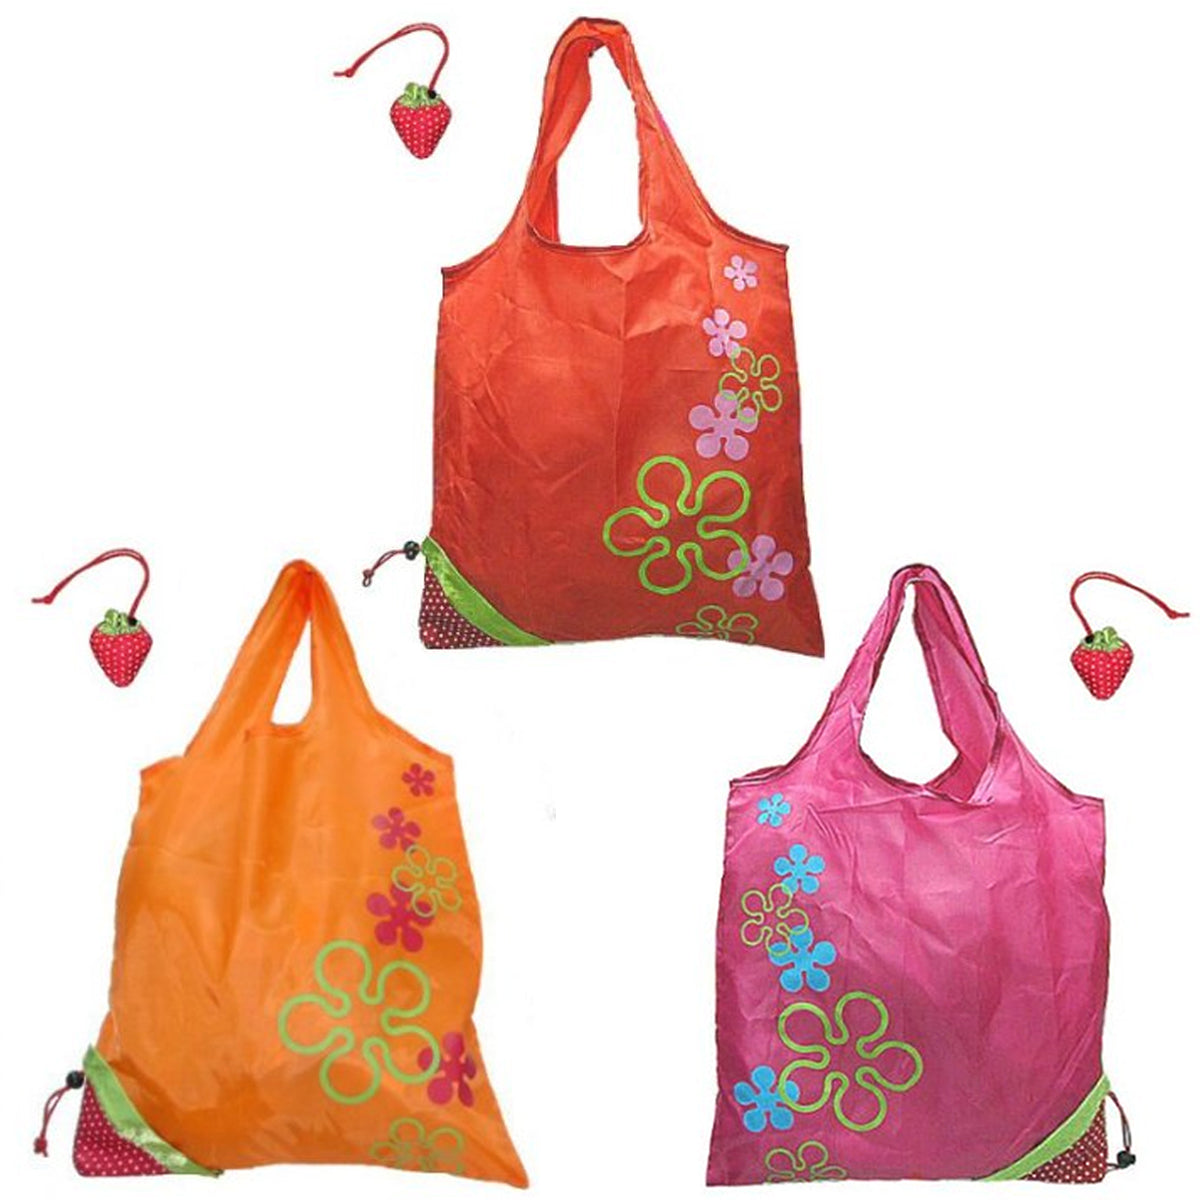 Reusable Shopping Tote Bag that Folds into a Strawberry